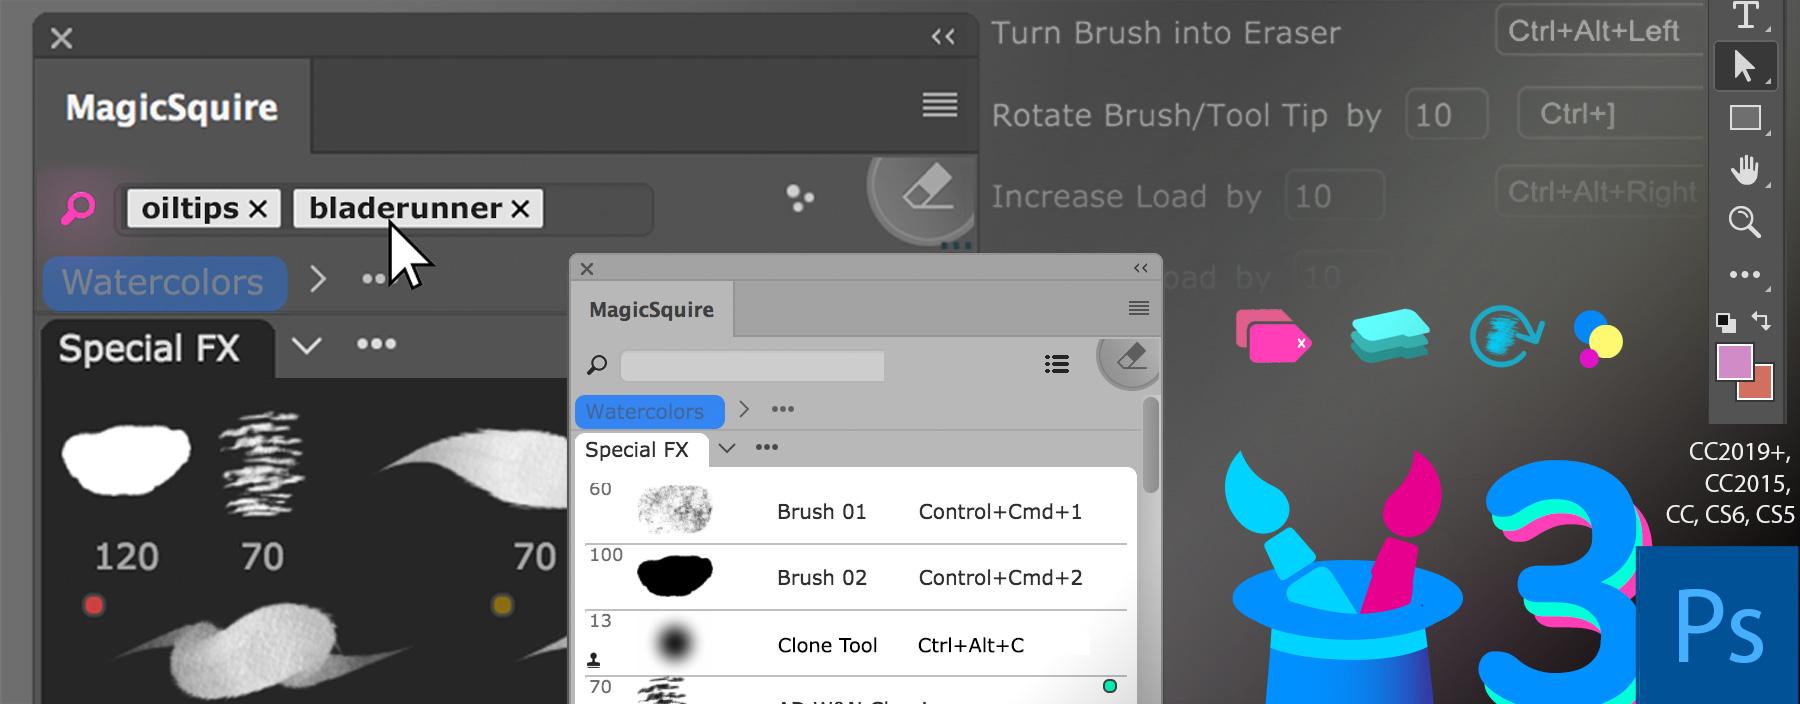 MagicSquire 3.1: Brush Tags improved, Collections speeded up, more